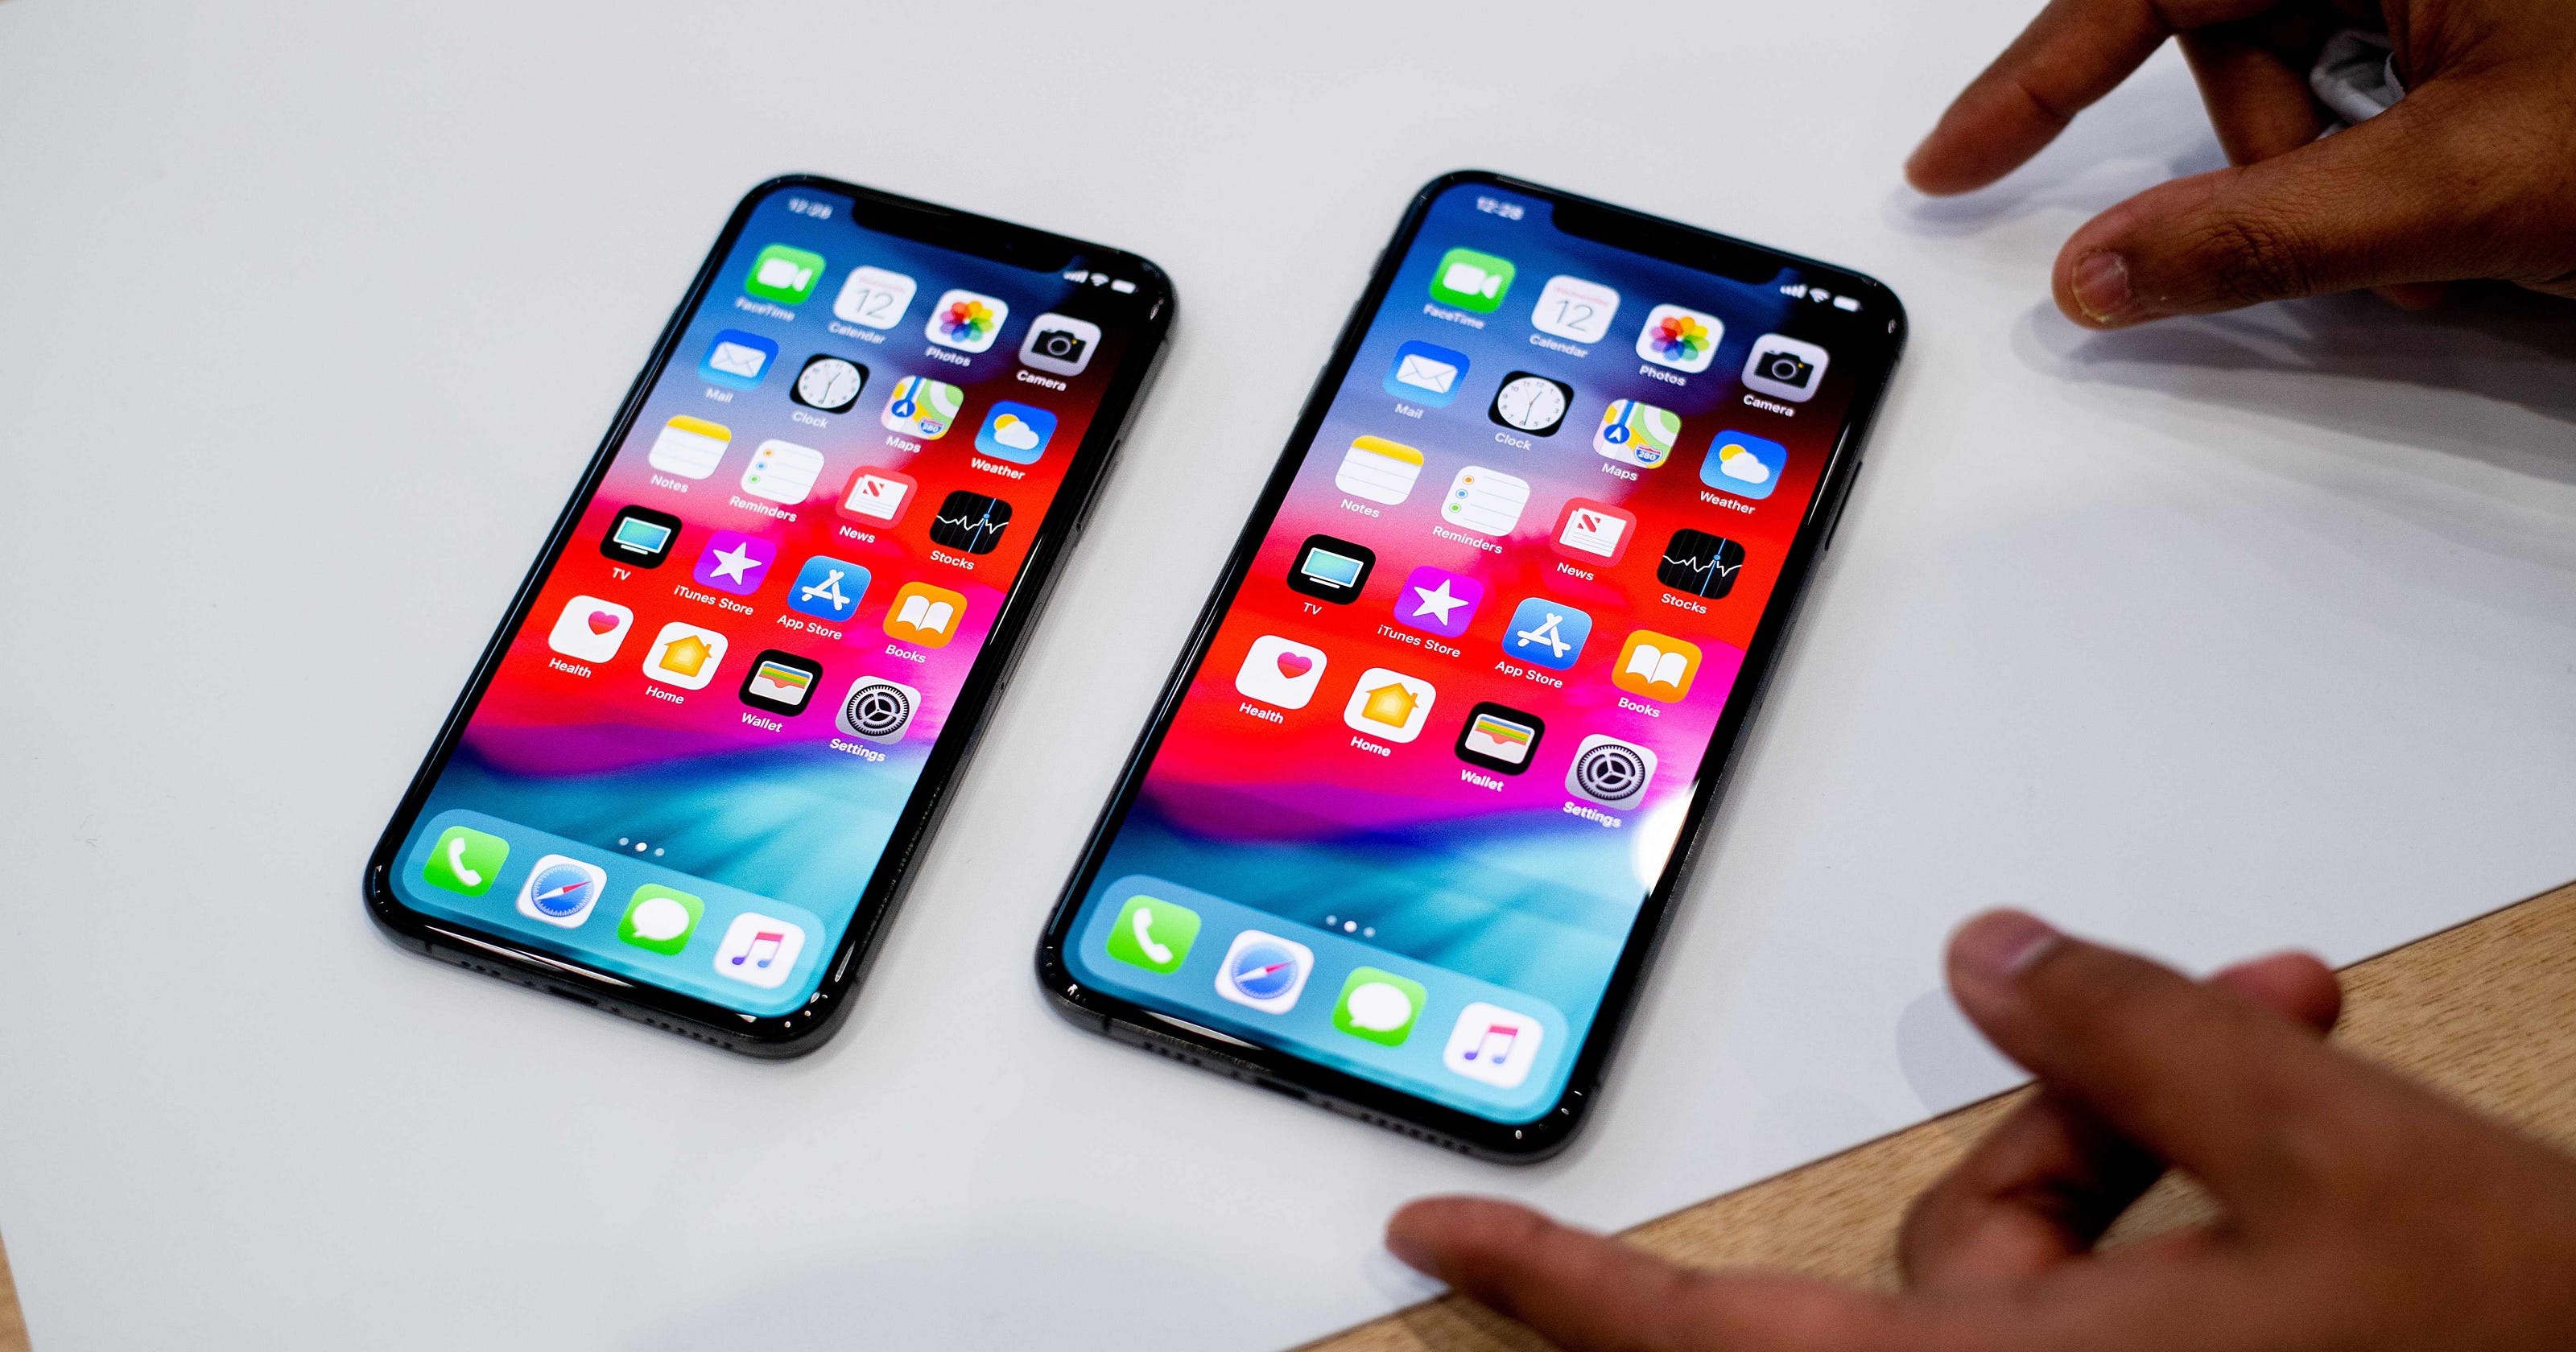 iPhone XS and iPhone XS Max pricing: What are the best carrier deals?